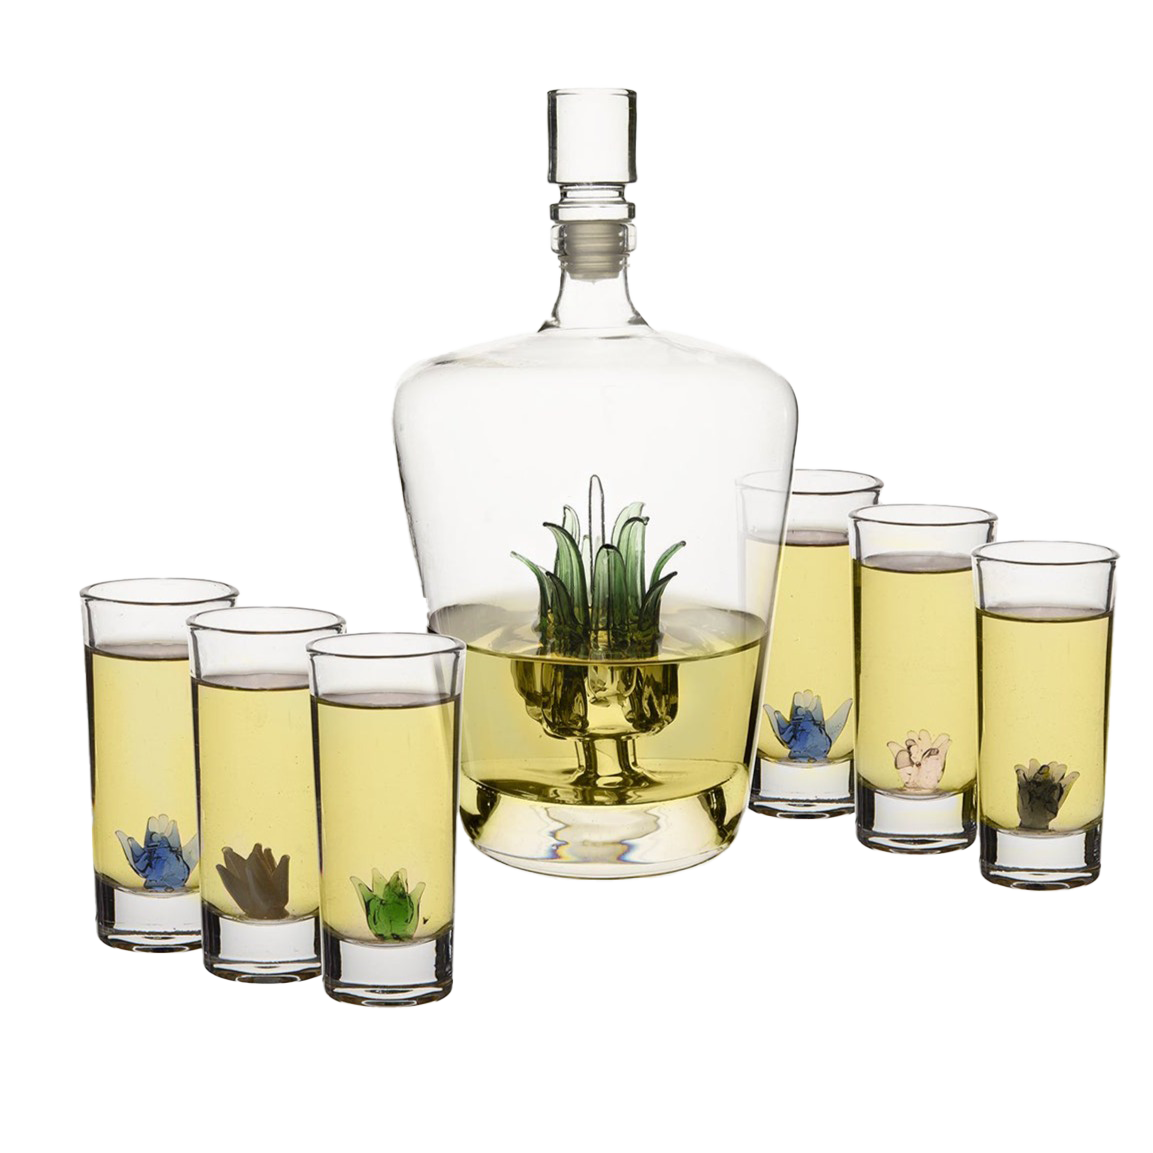 Tequila Agave Decanter Set